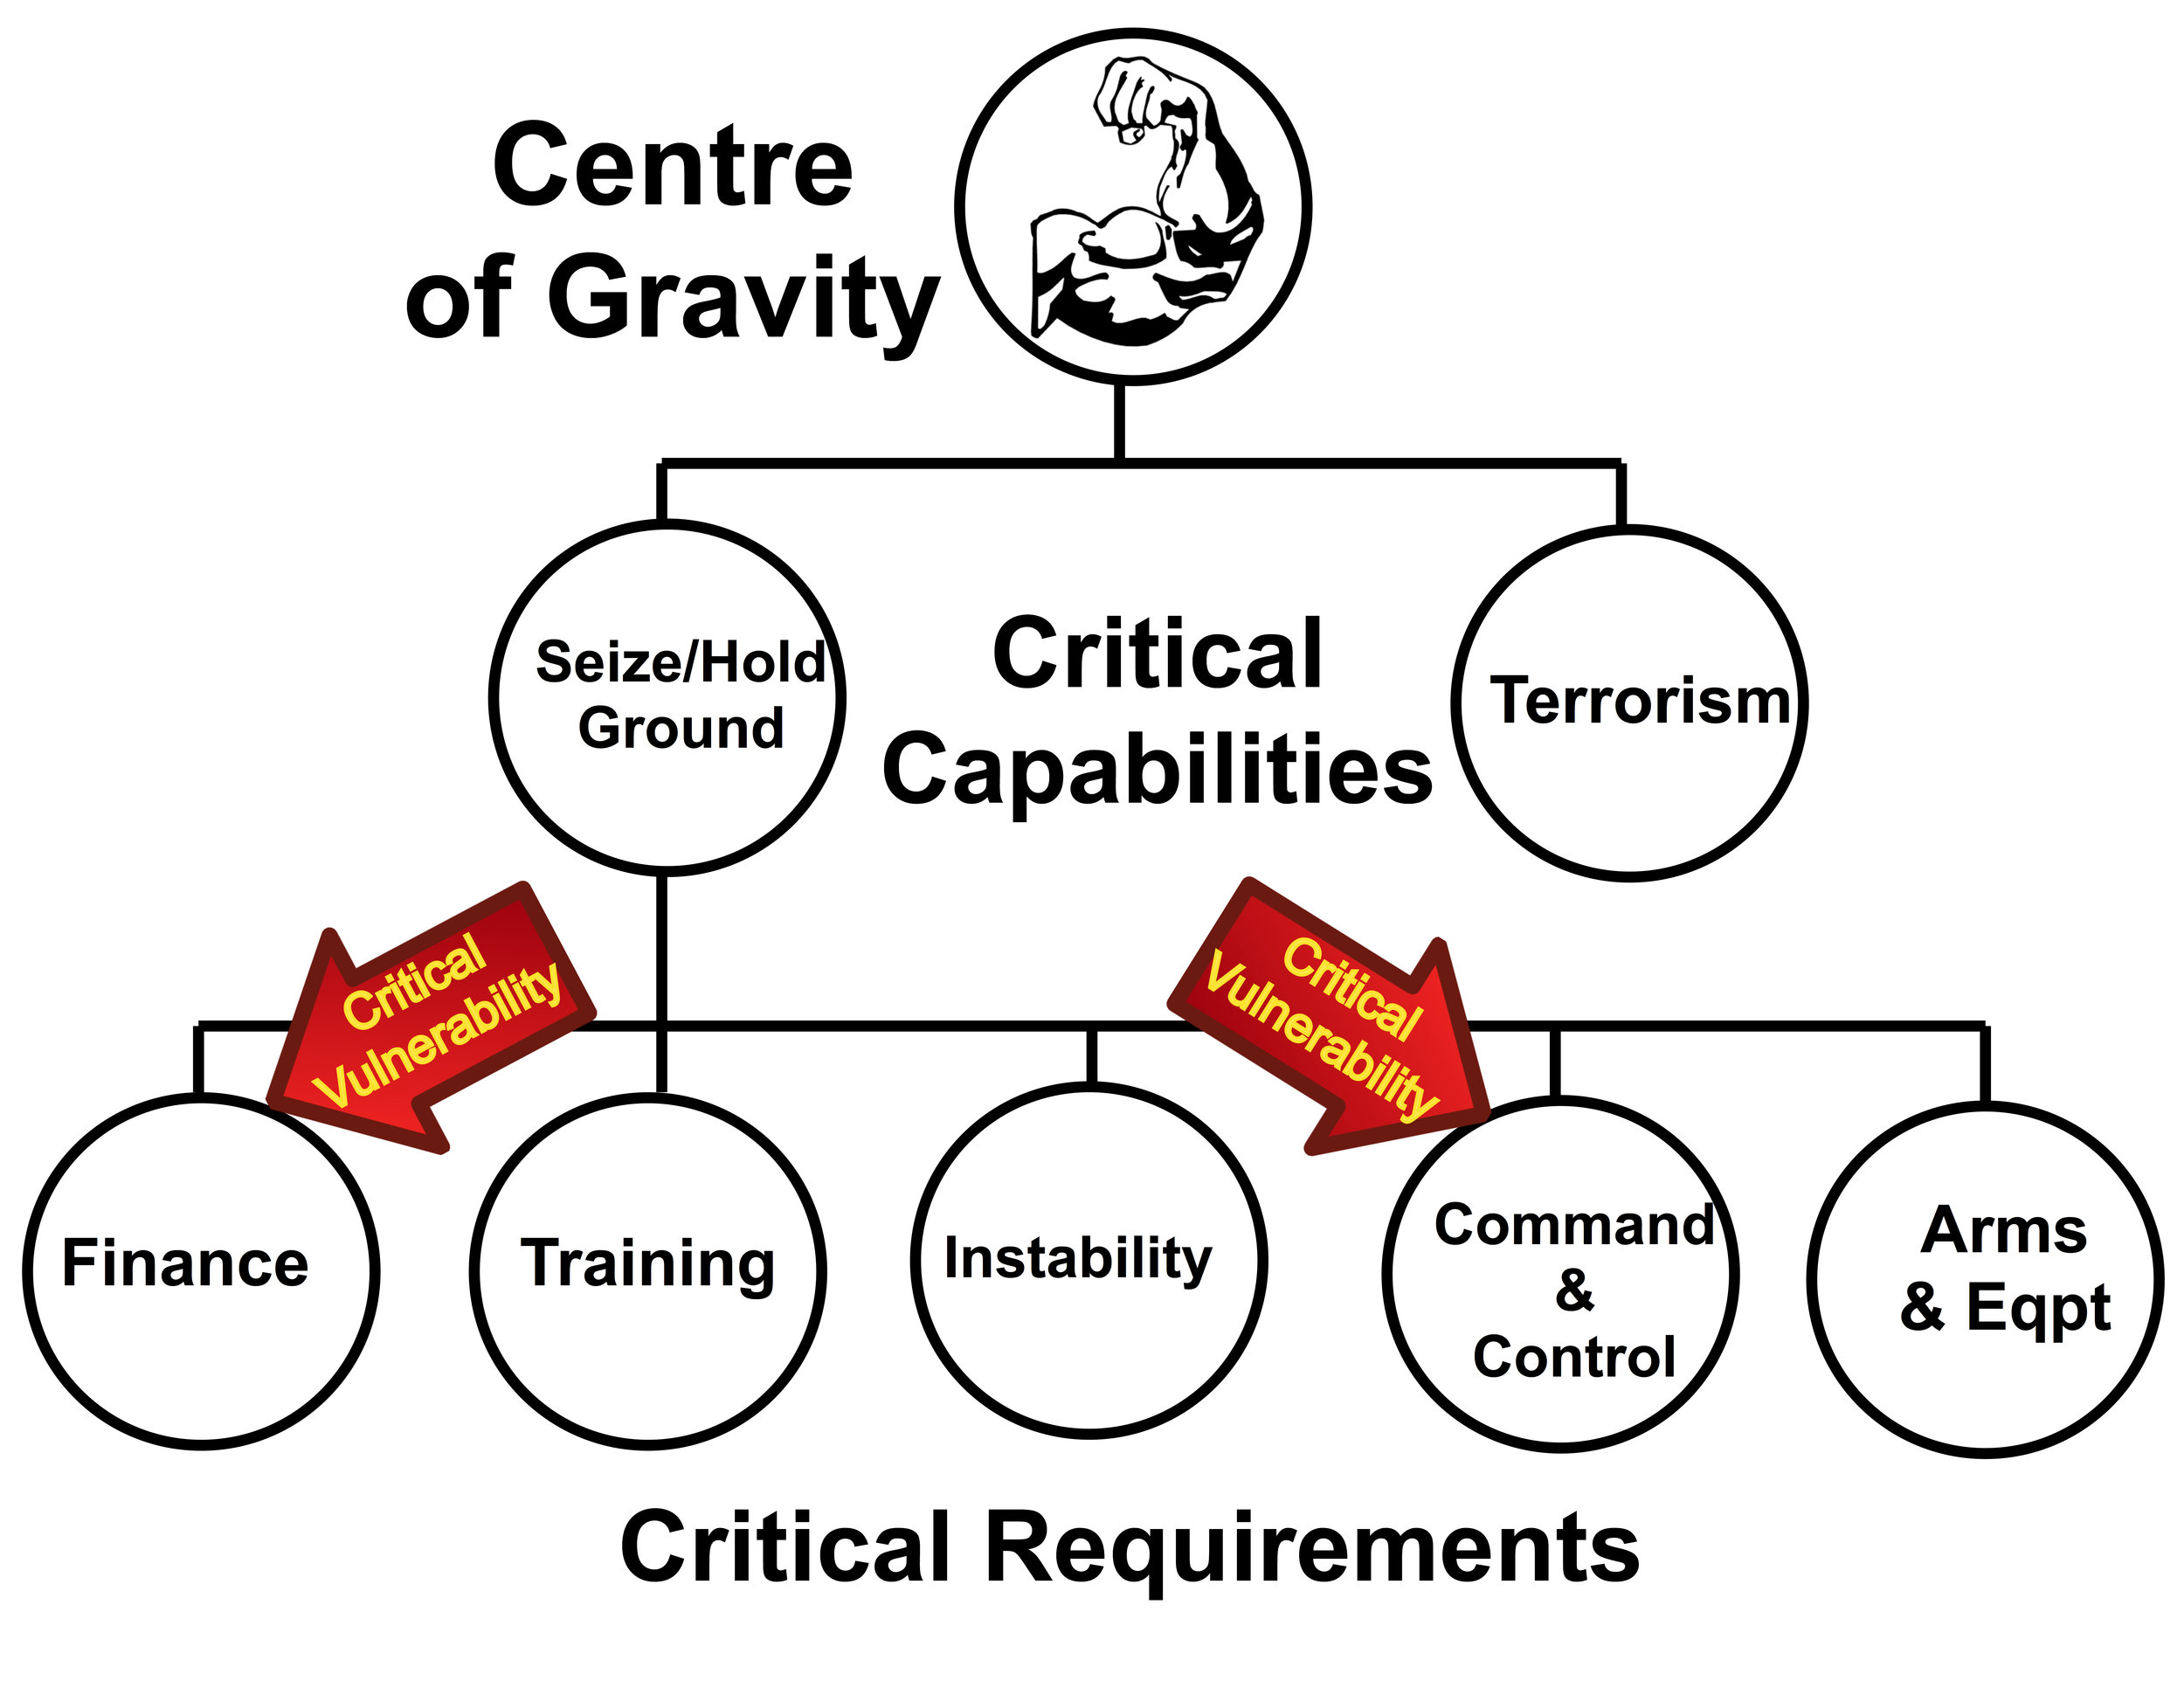 FOCUS OF EFFORTS: The Importance Of A Force's Centre Of Gravity When ...